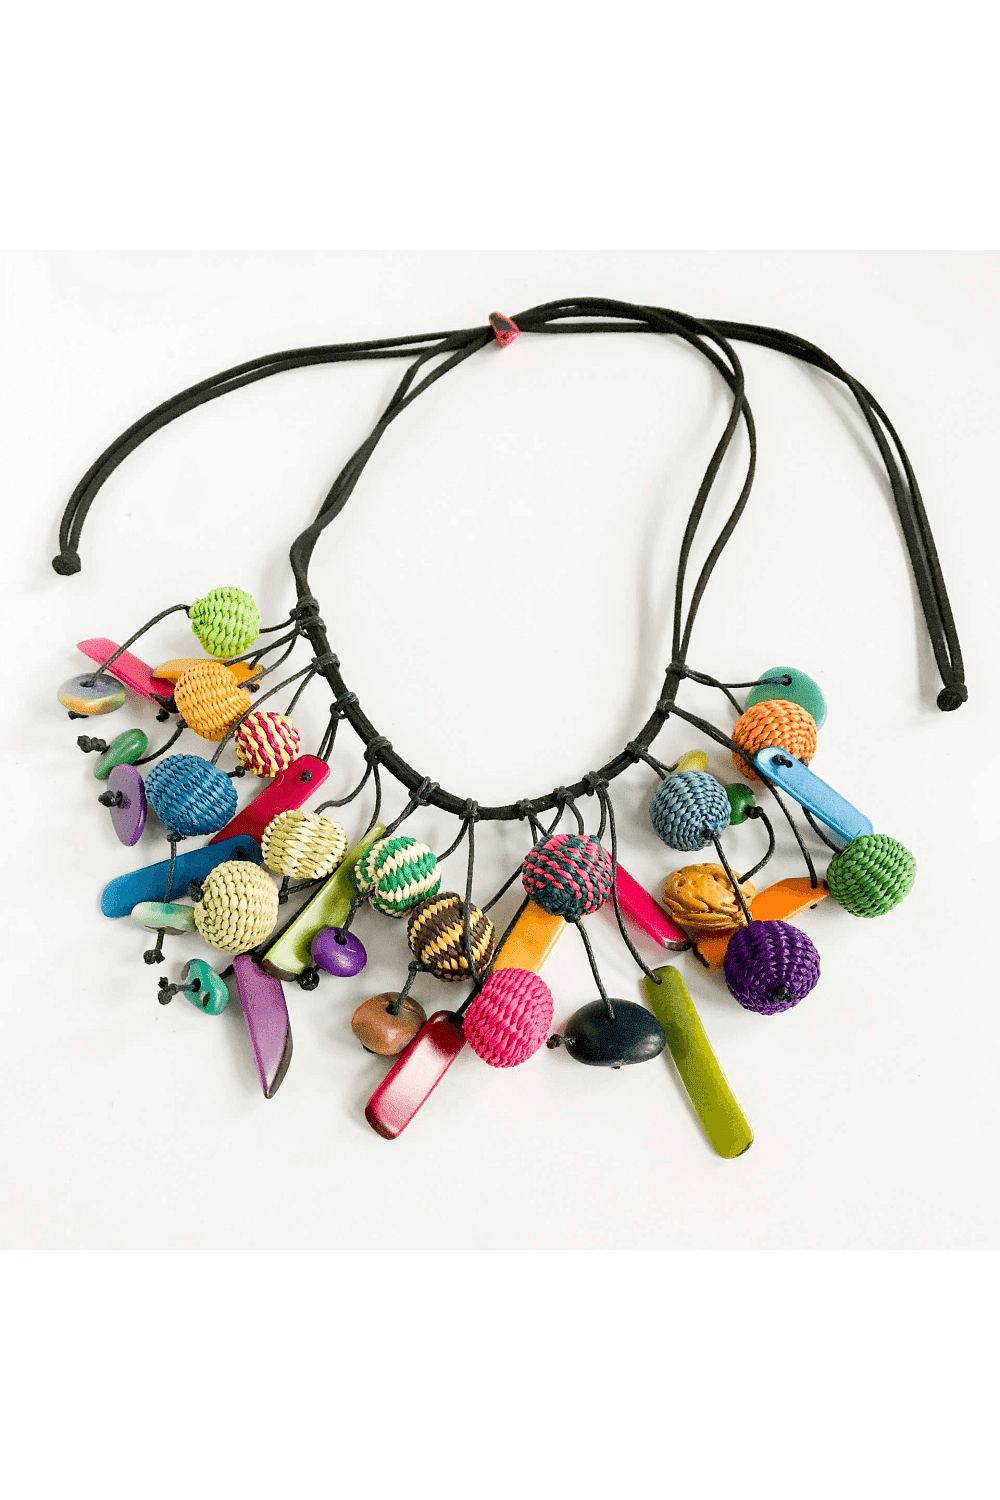 Taqua chips and woven beads strung on a black cord adjustable necklace. Mulit bright colors.